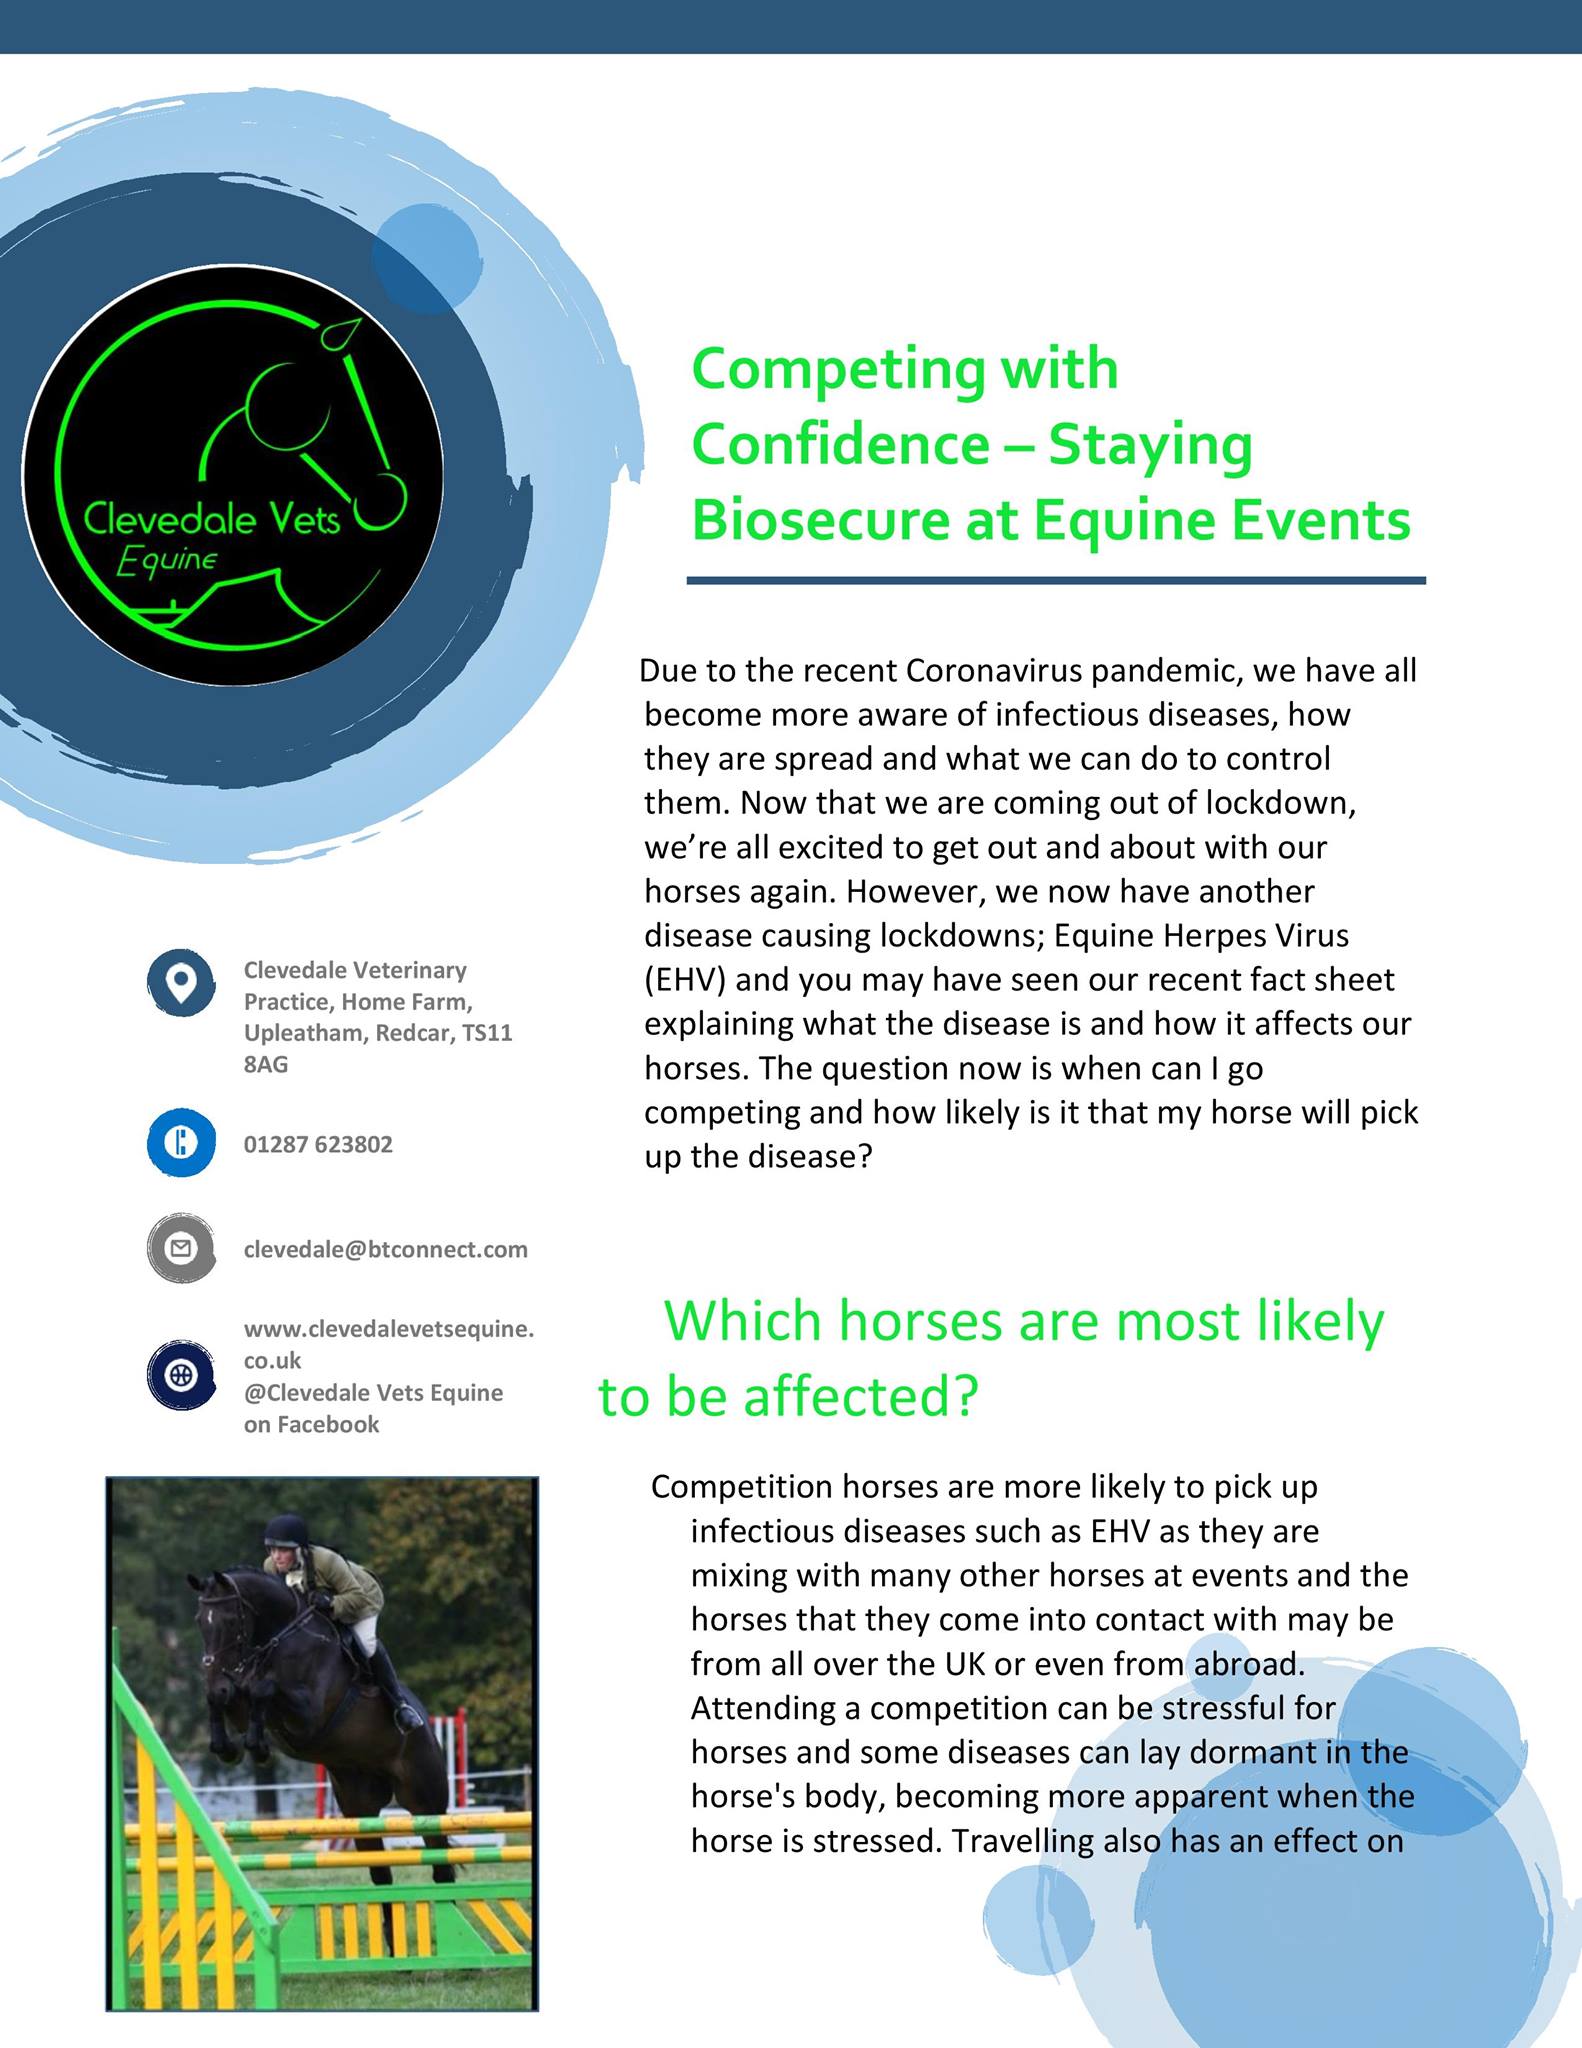 Biosecurity At Equine Events 1